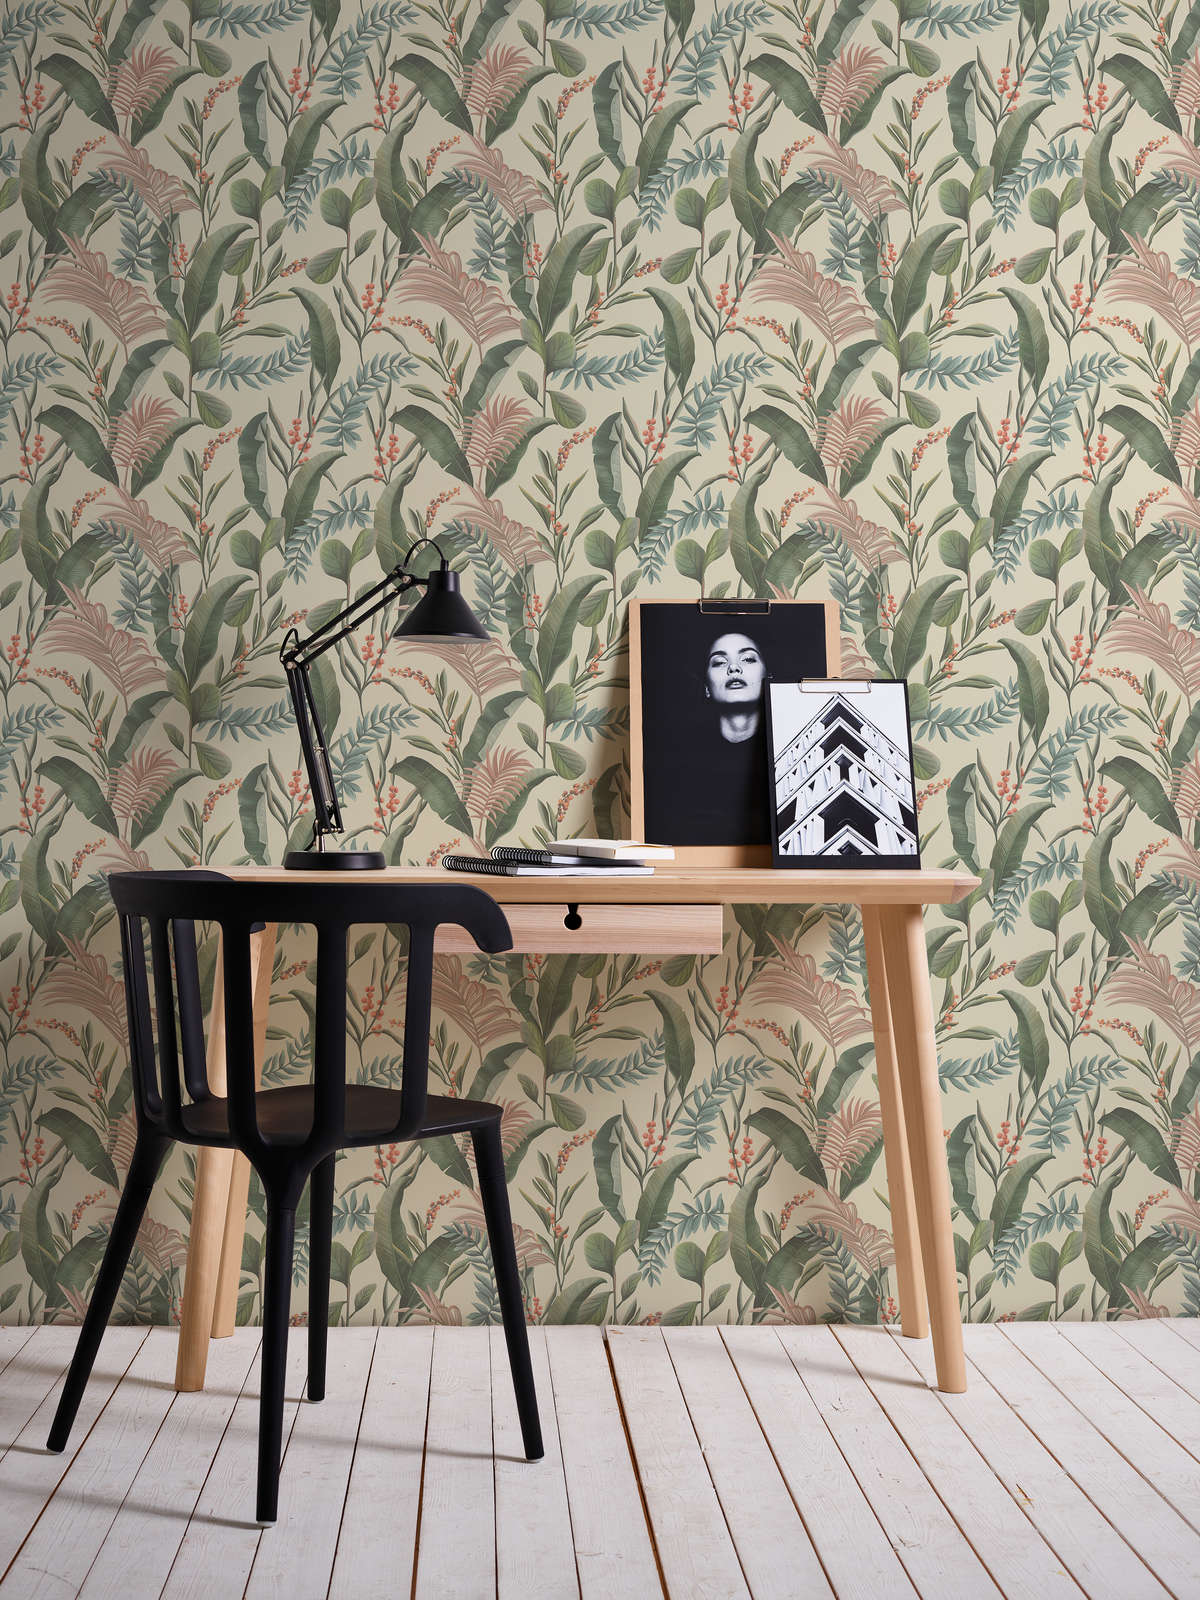             Floral wallpaper with leaves in jungle style textured matt - cream, green, beige
        